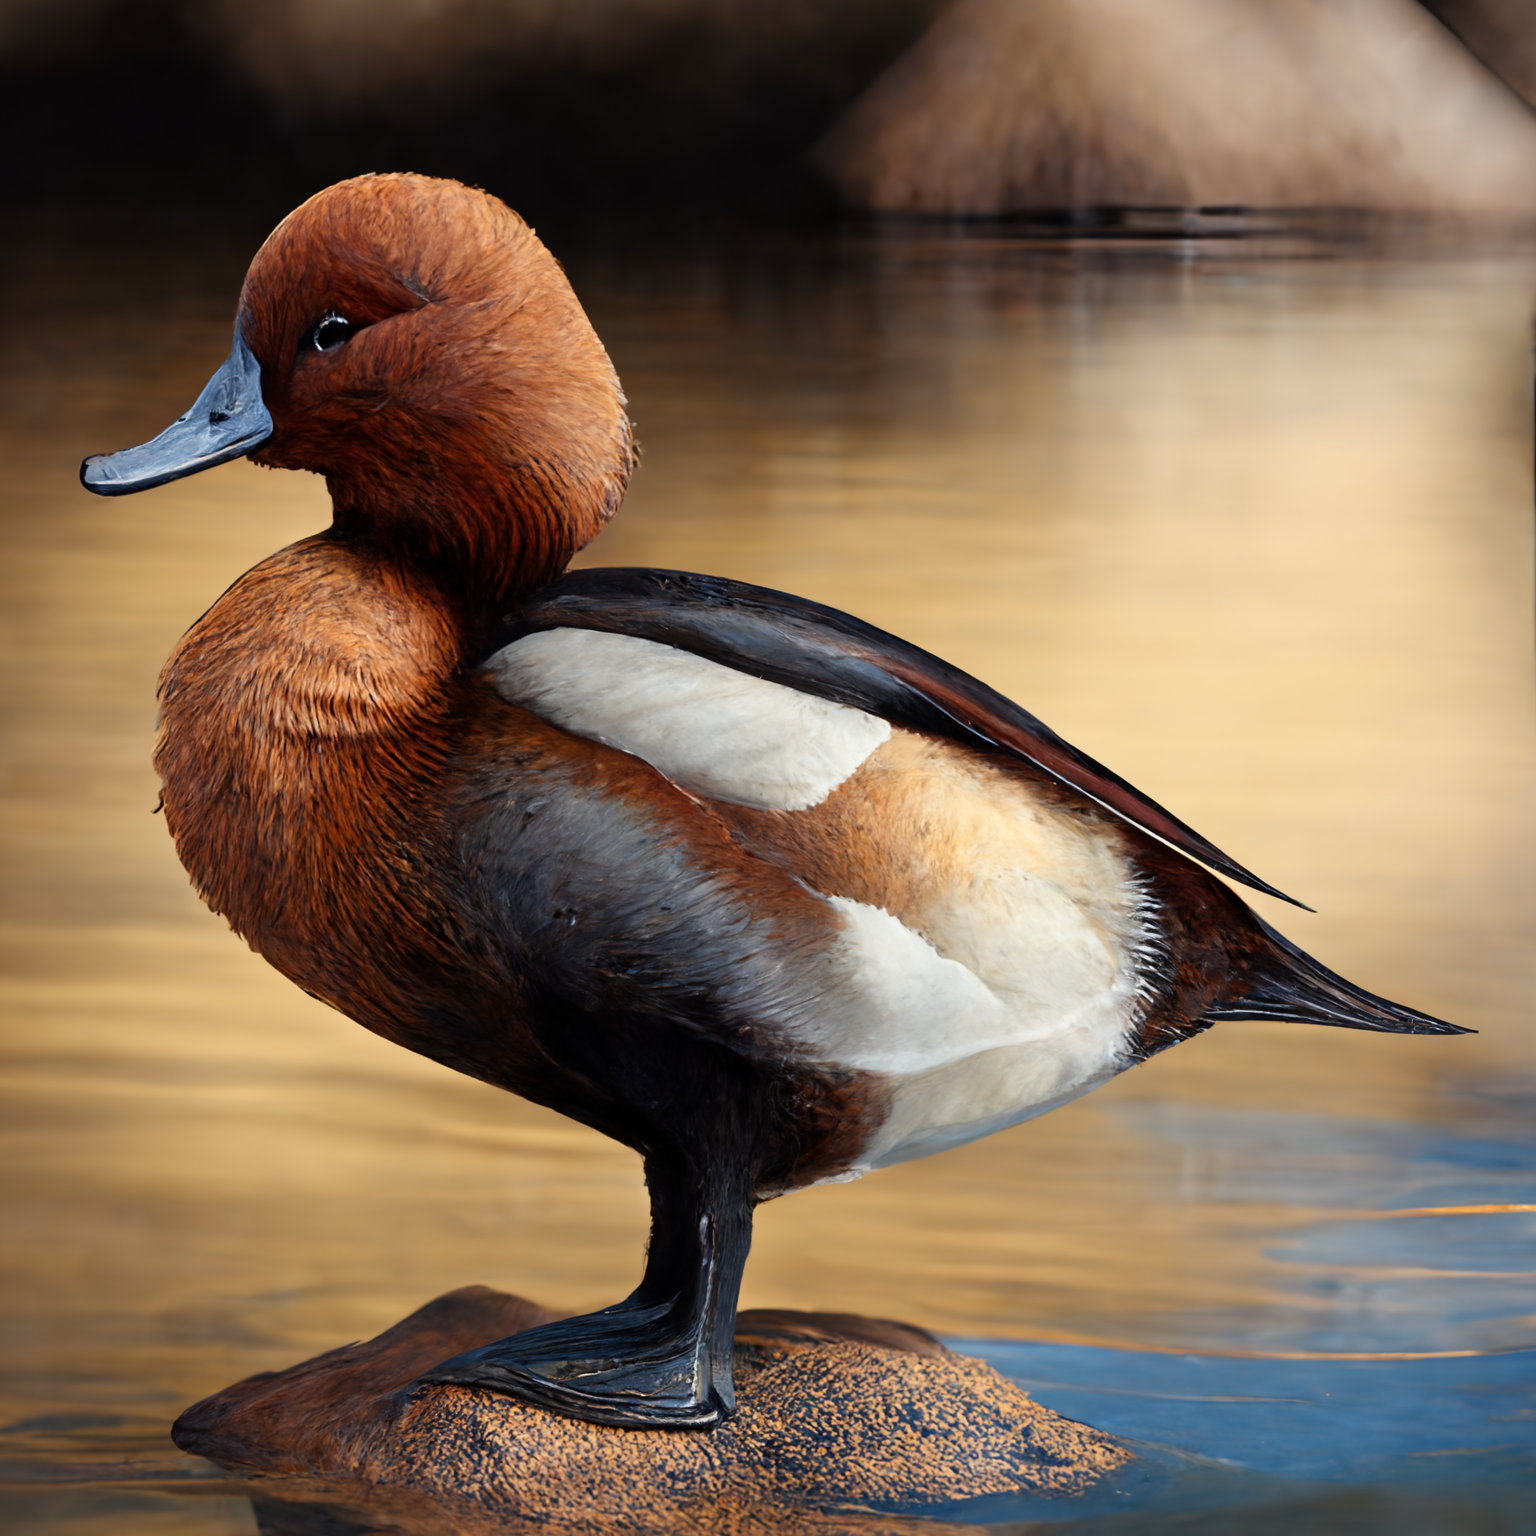 Madagascar pochard is an endangered species of the duck